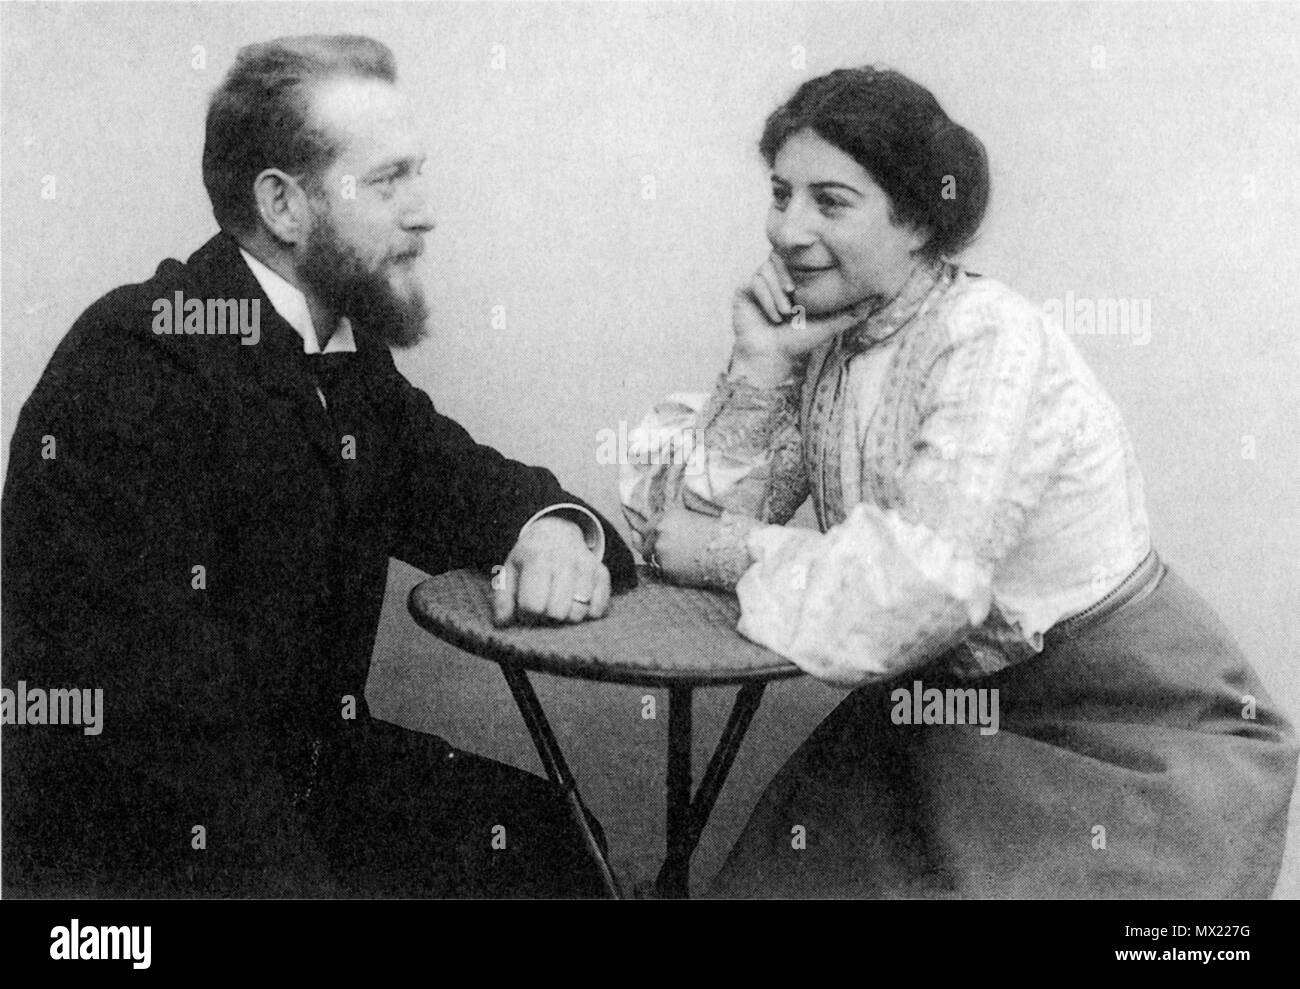 . English: Photograph of Otrto Magnus and his wife Traudl about 1905 . 15 November 2012, 13:37:35. Unknown 531 Rudolf and Traudl Stock Photo